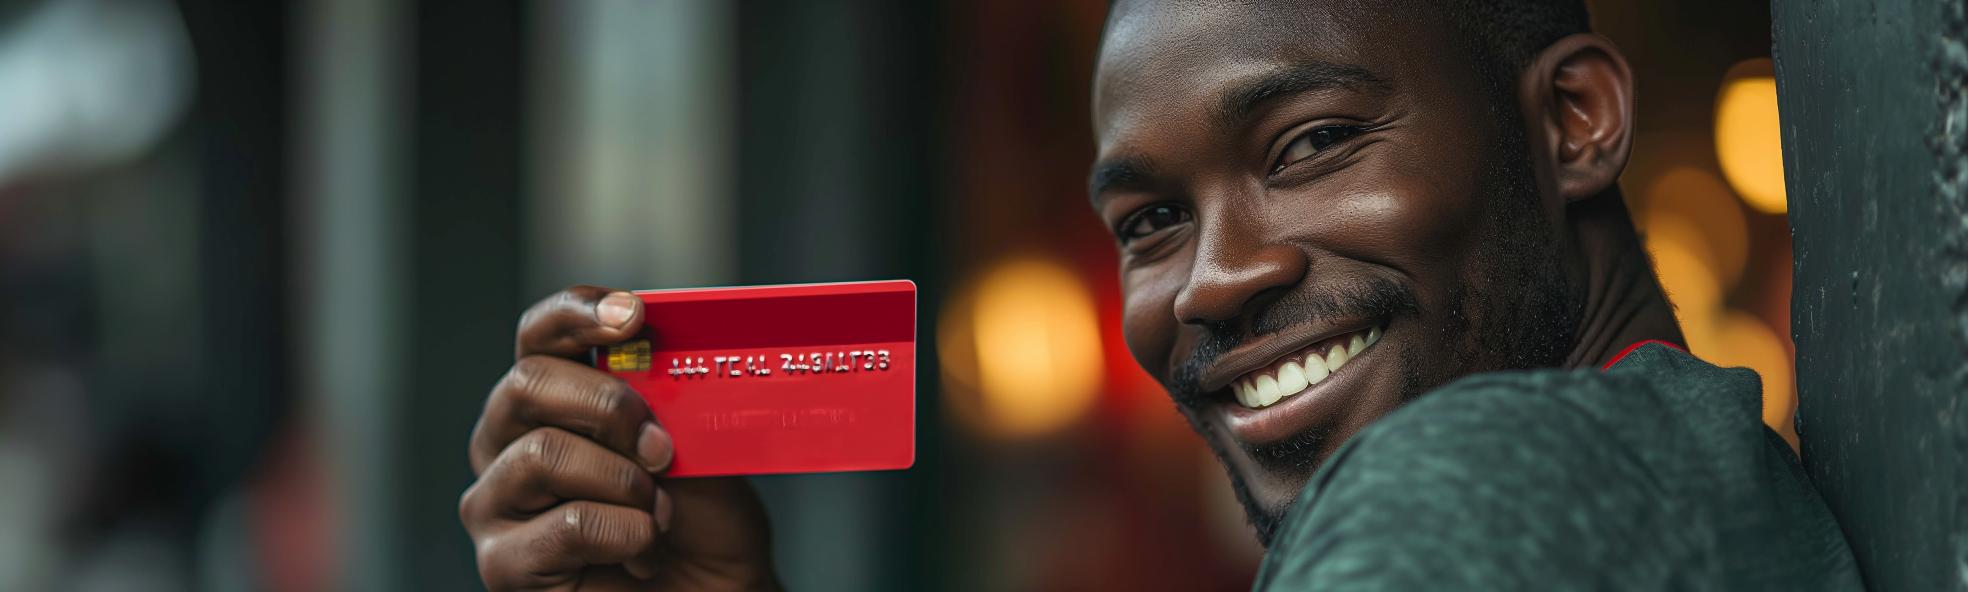 Black man holding a red Payment card